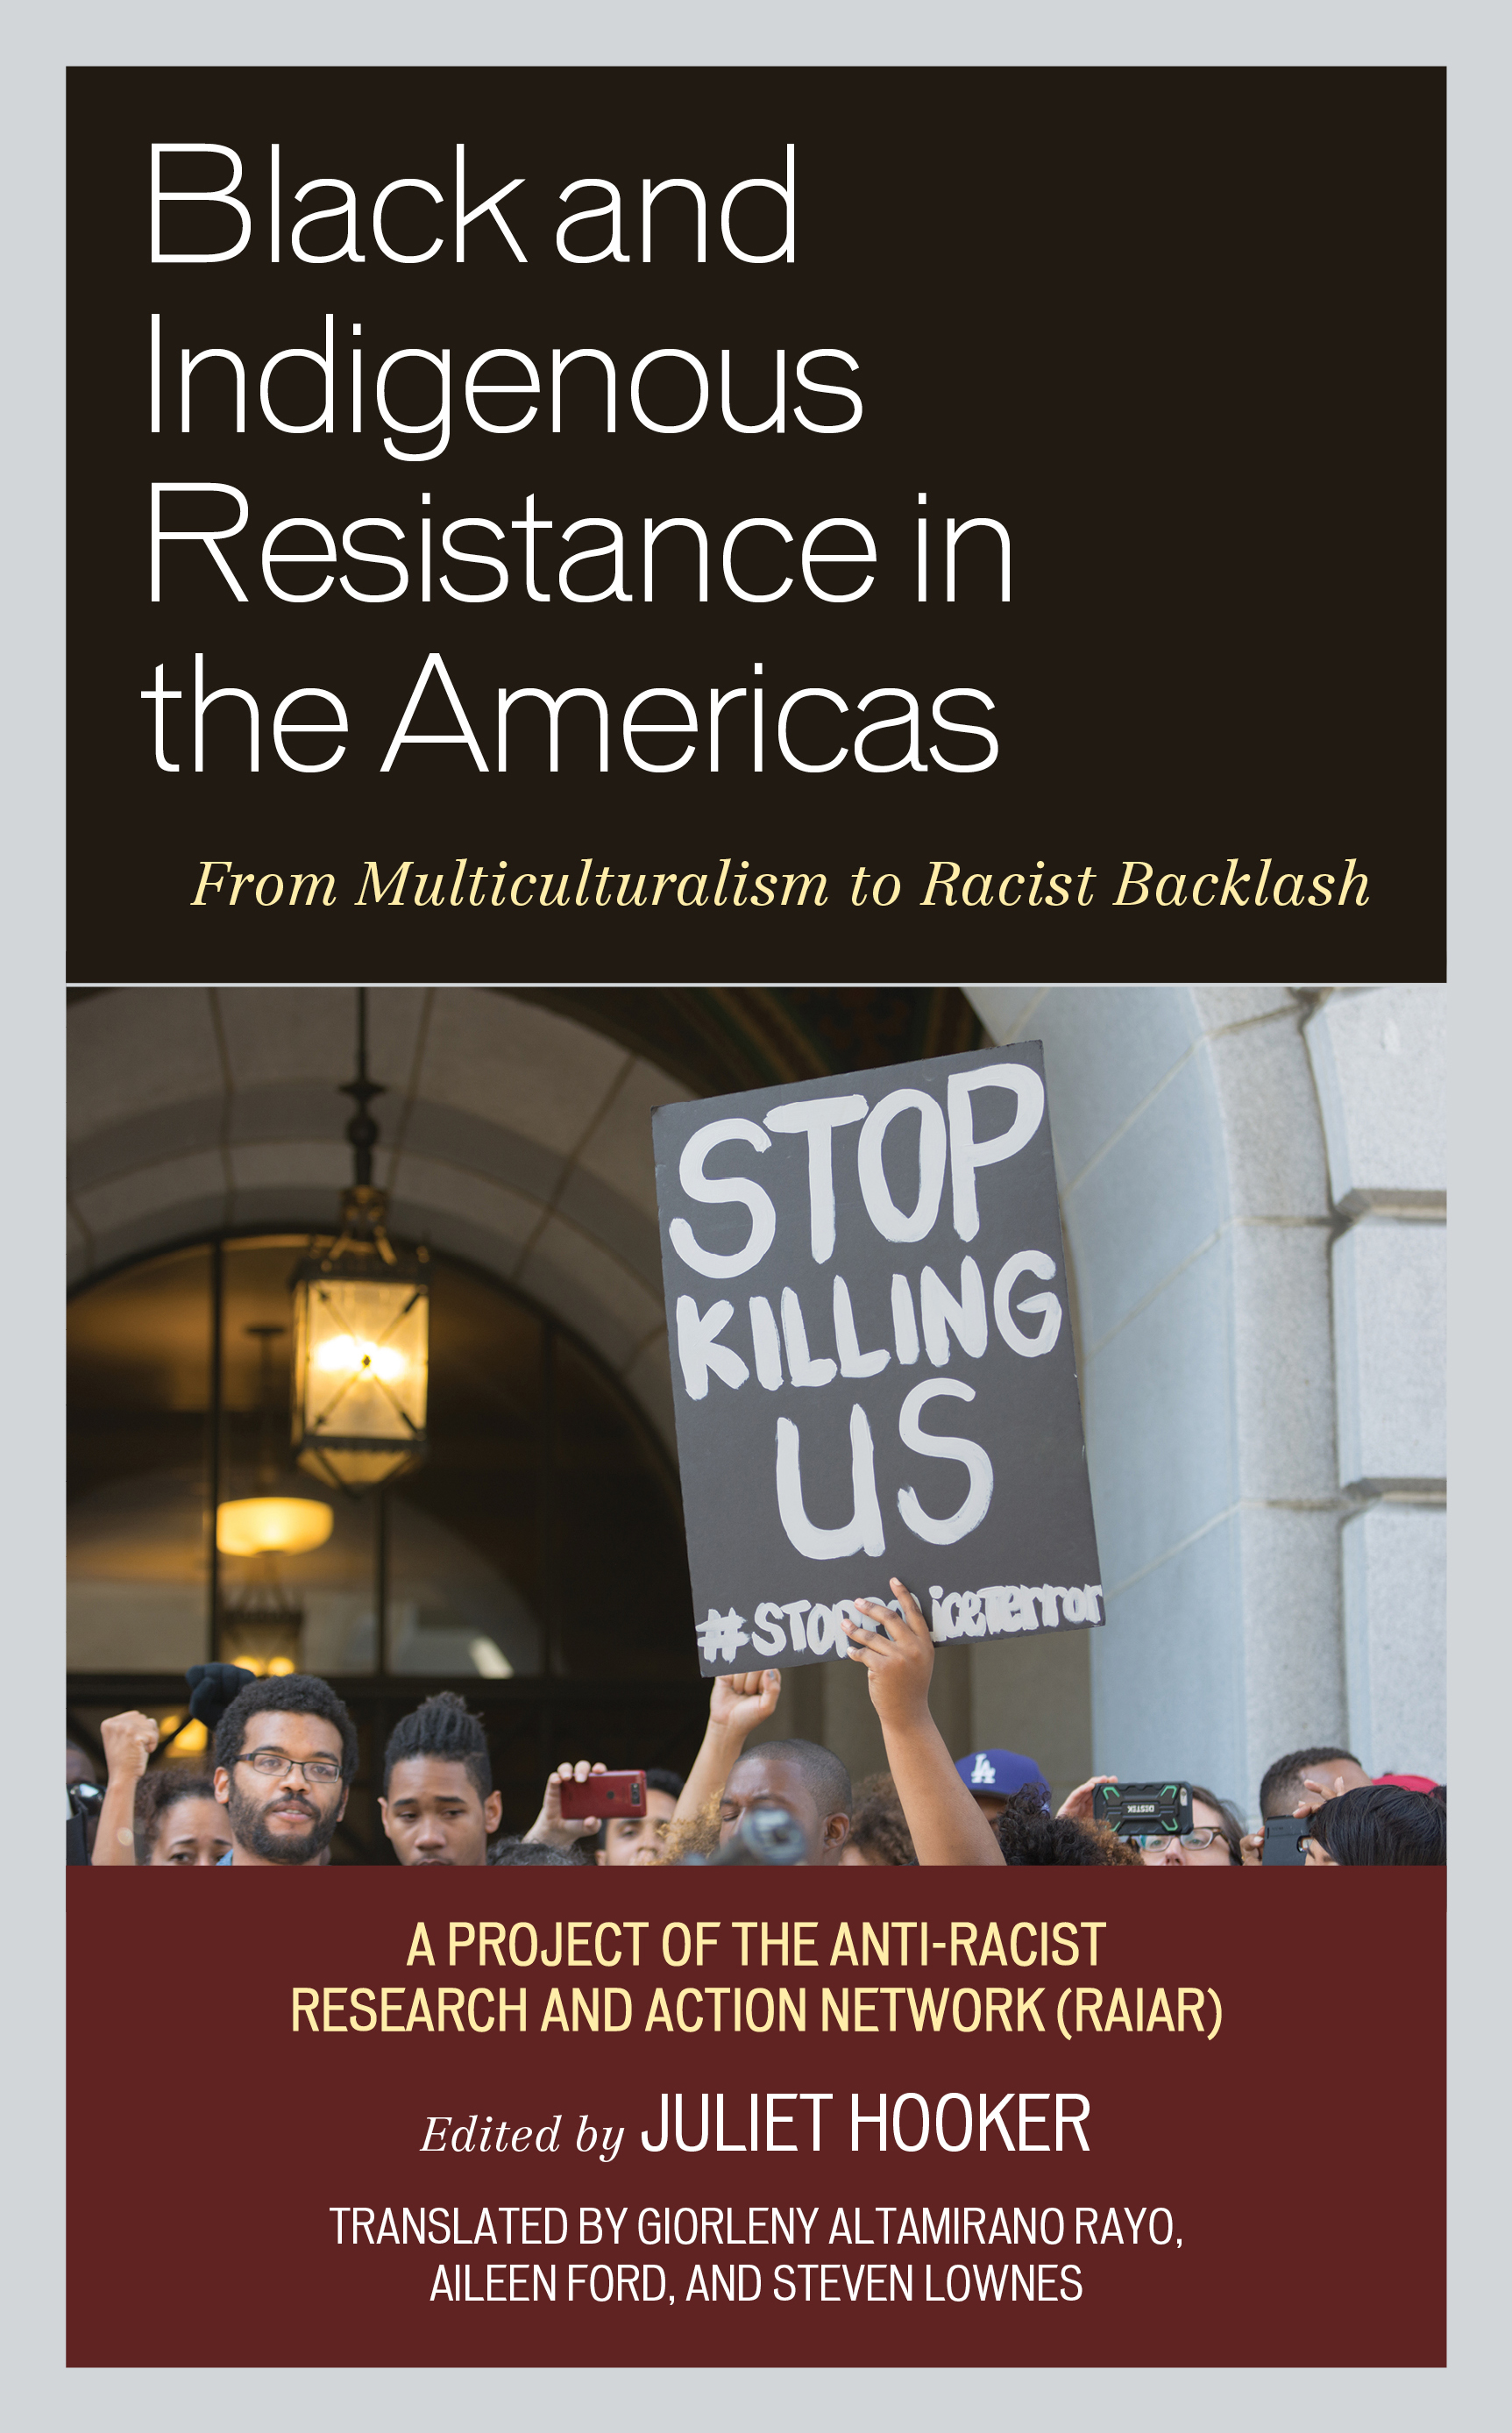 Black and Indigenous Resistance in the Americas: From Multiculturalism to Racist Backlash